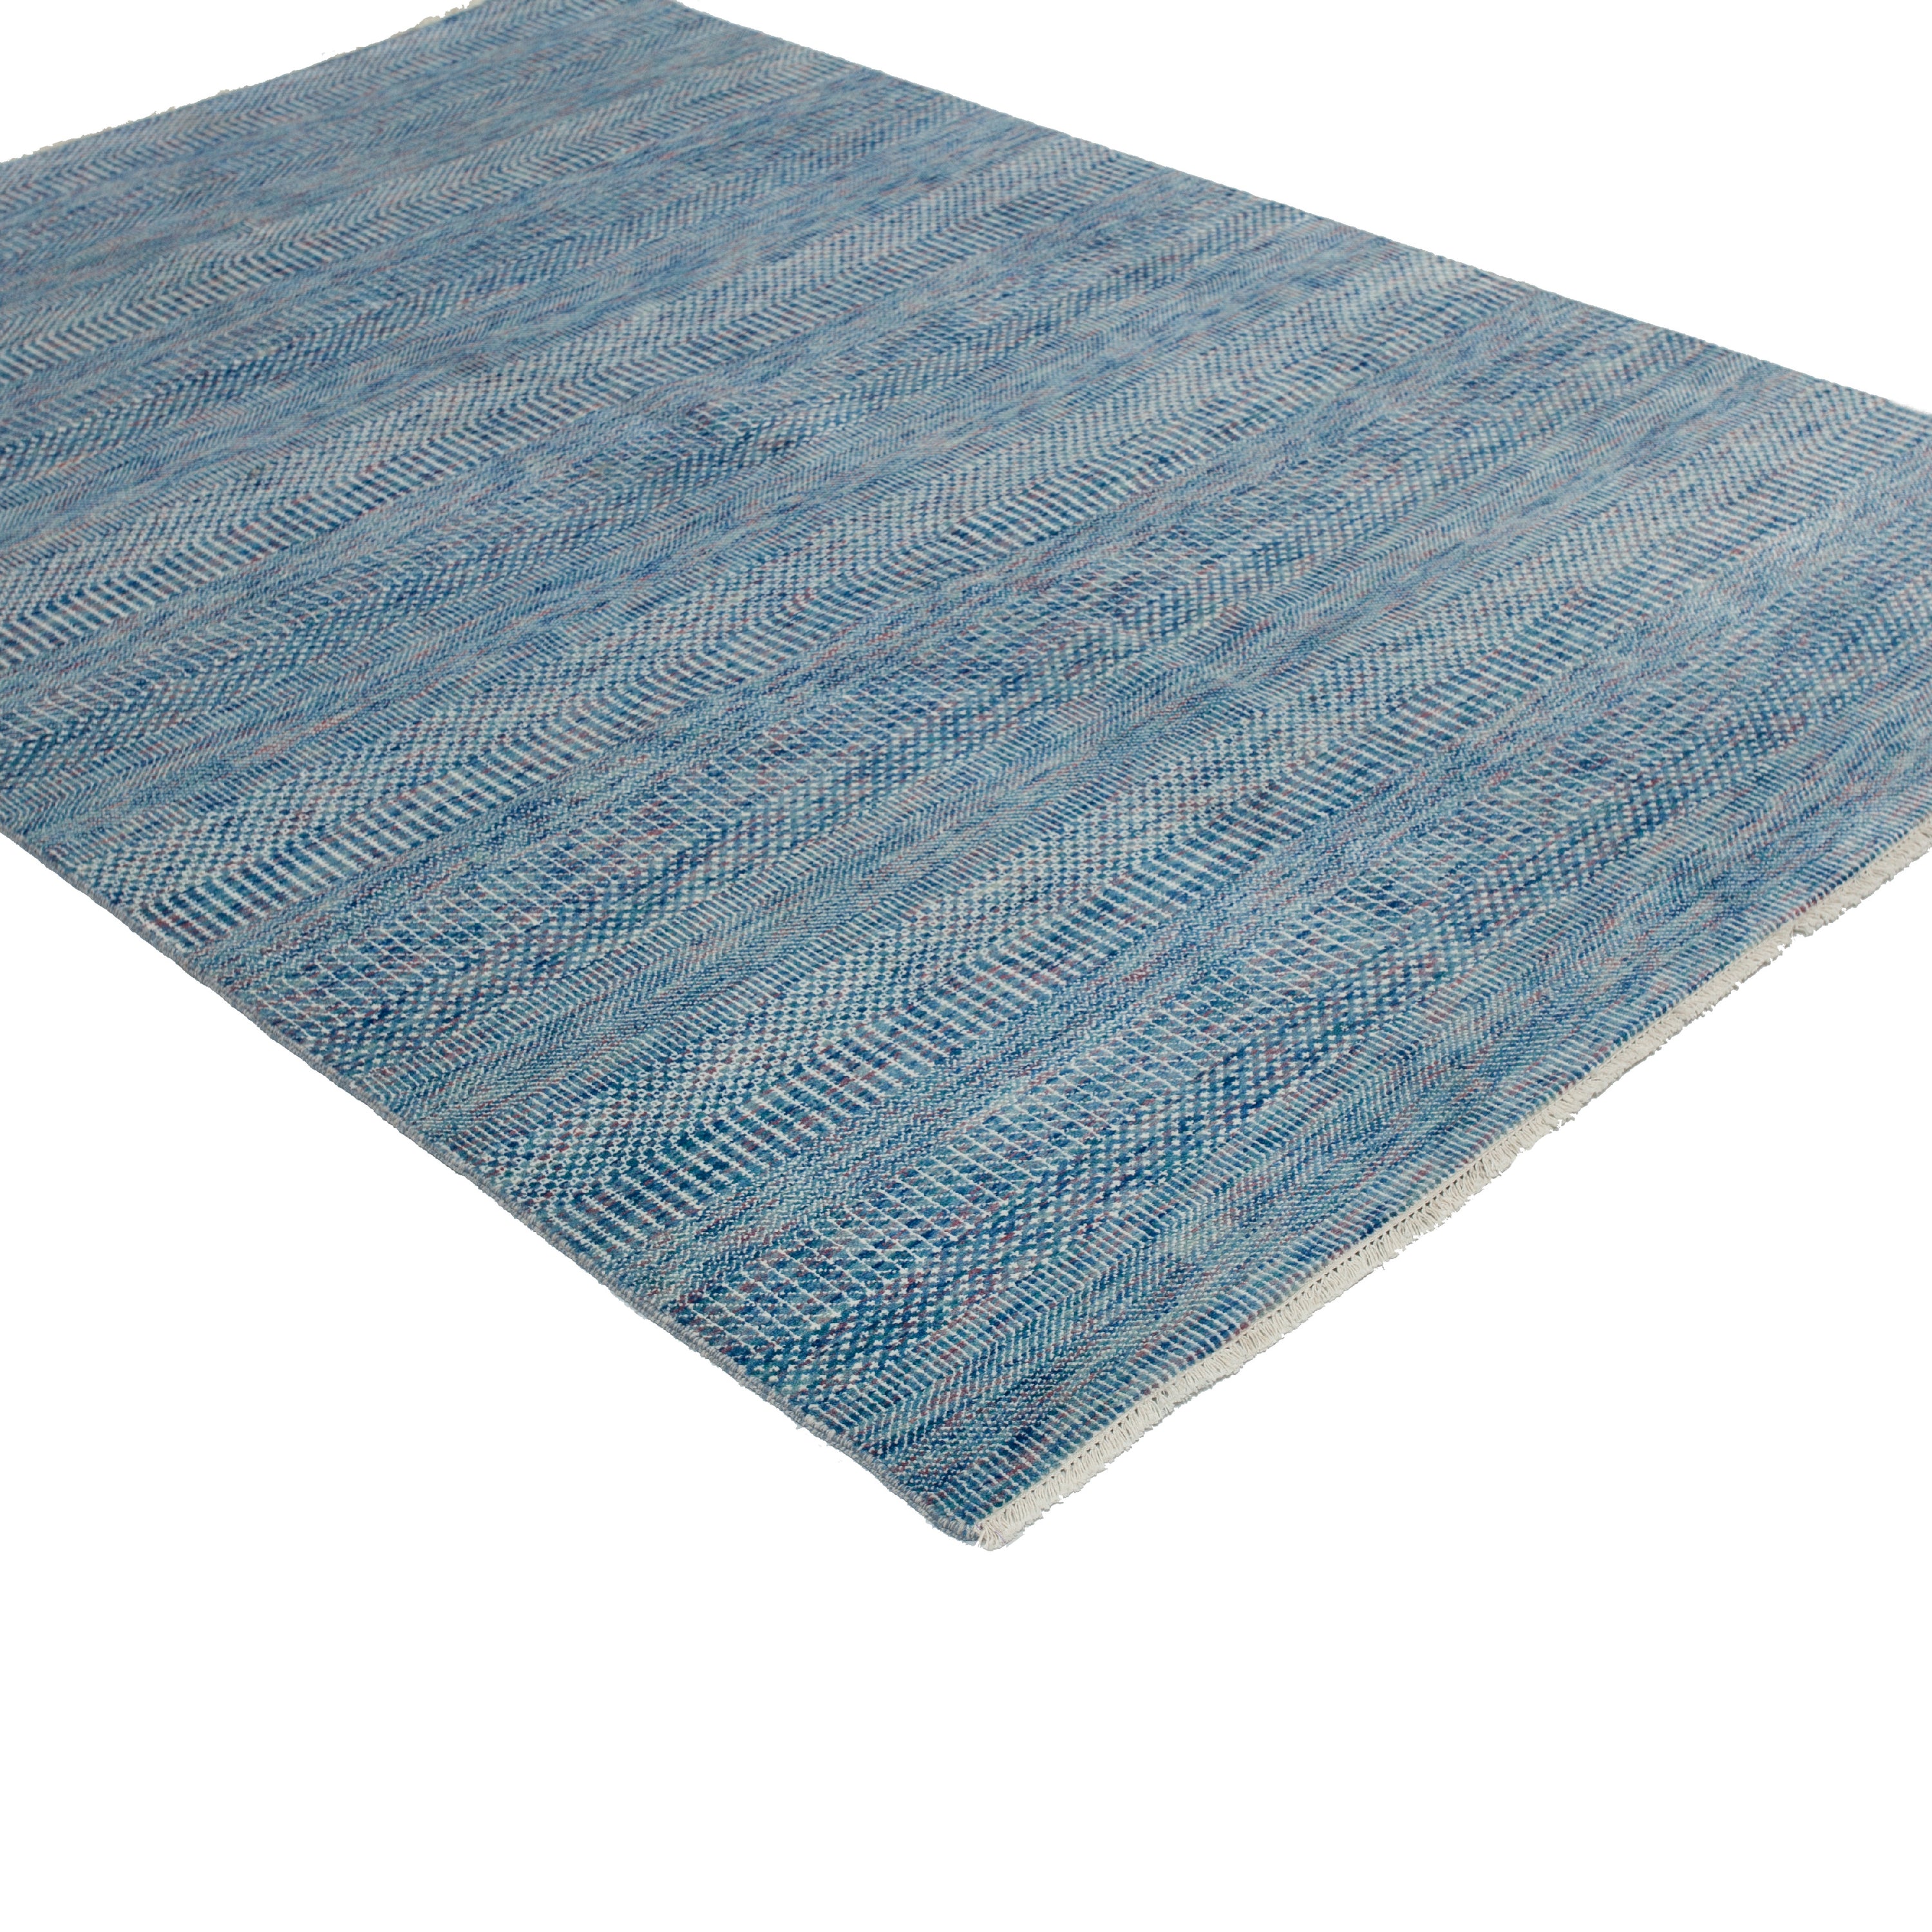 Hand-knotted Wool Rug - 9'2" x 6'2" Default Title